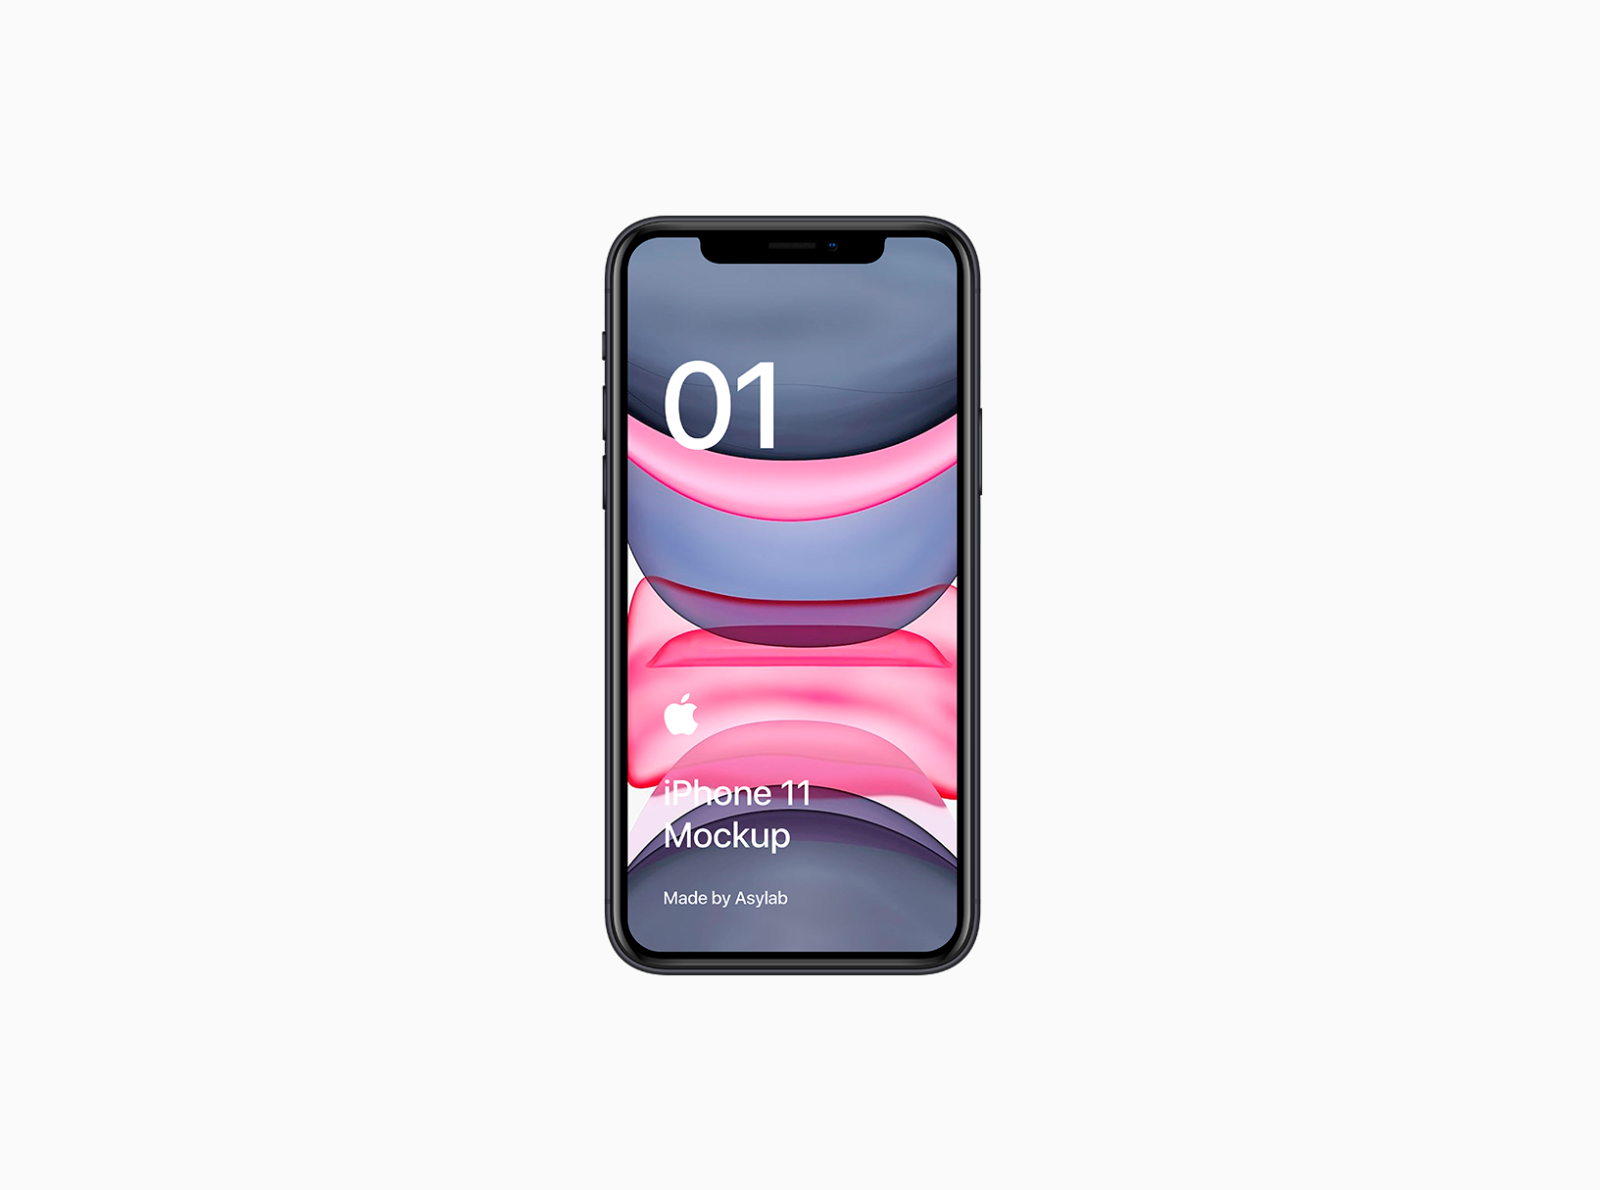 Download Freebie iPhone 11 Mockup - PSD by Asylab on Dribbble PSD Mockup Templates